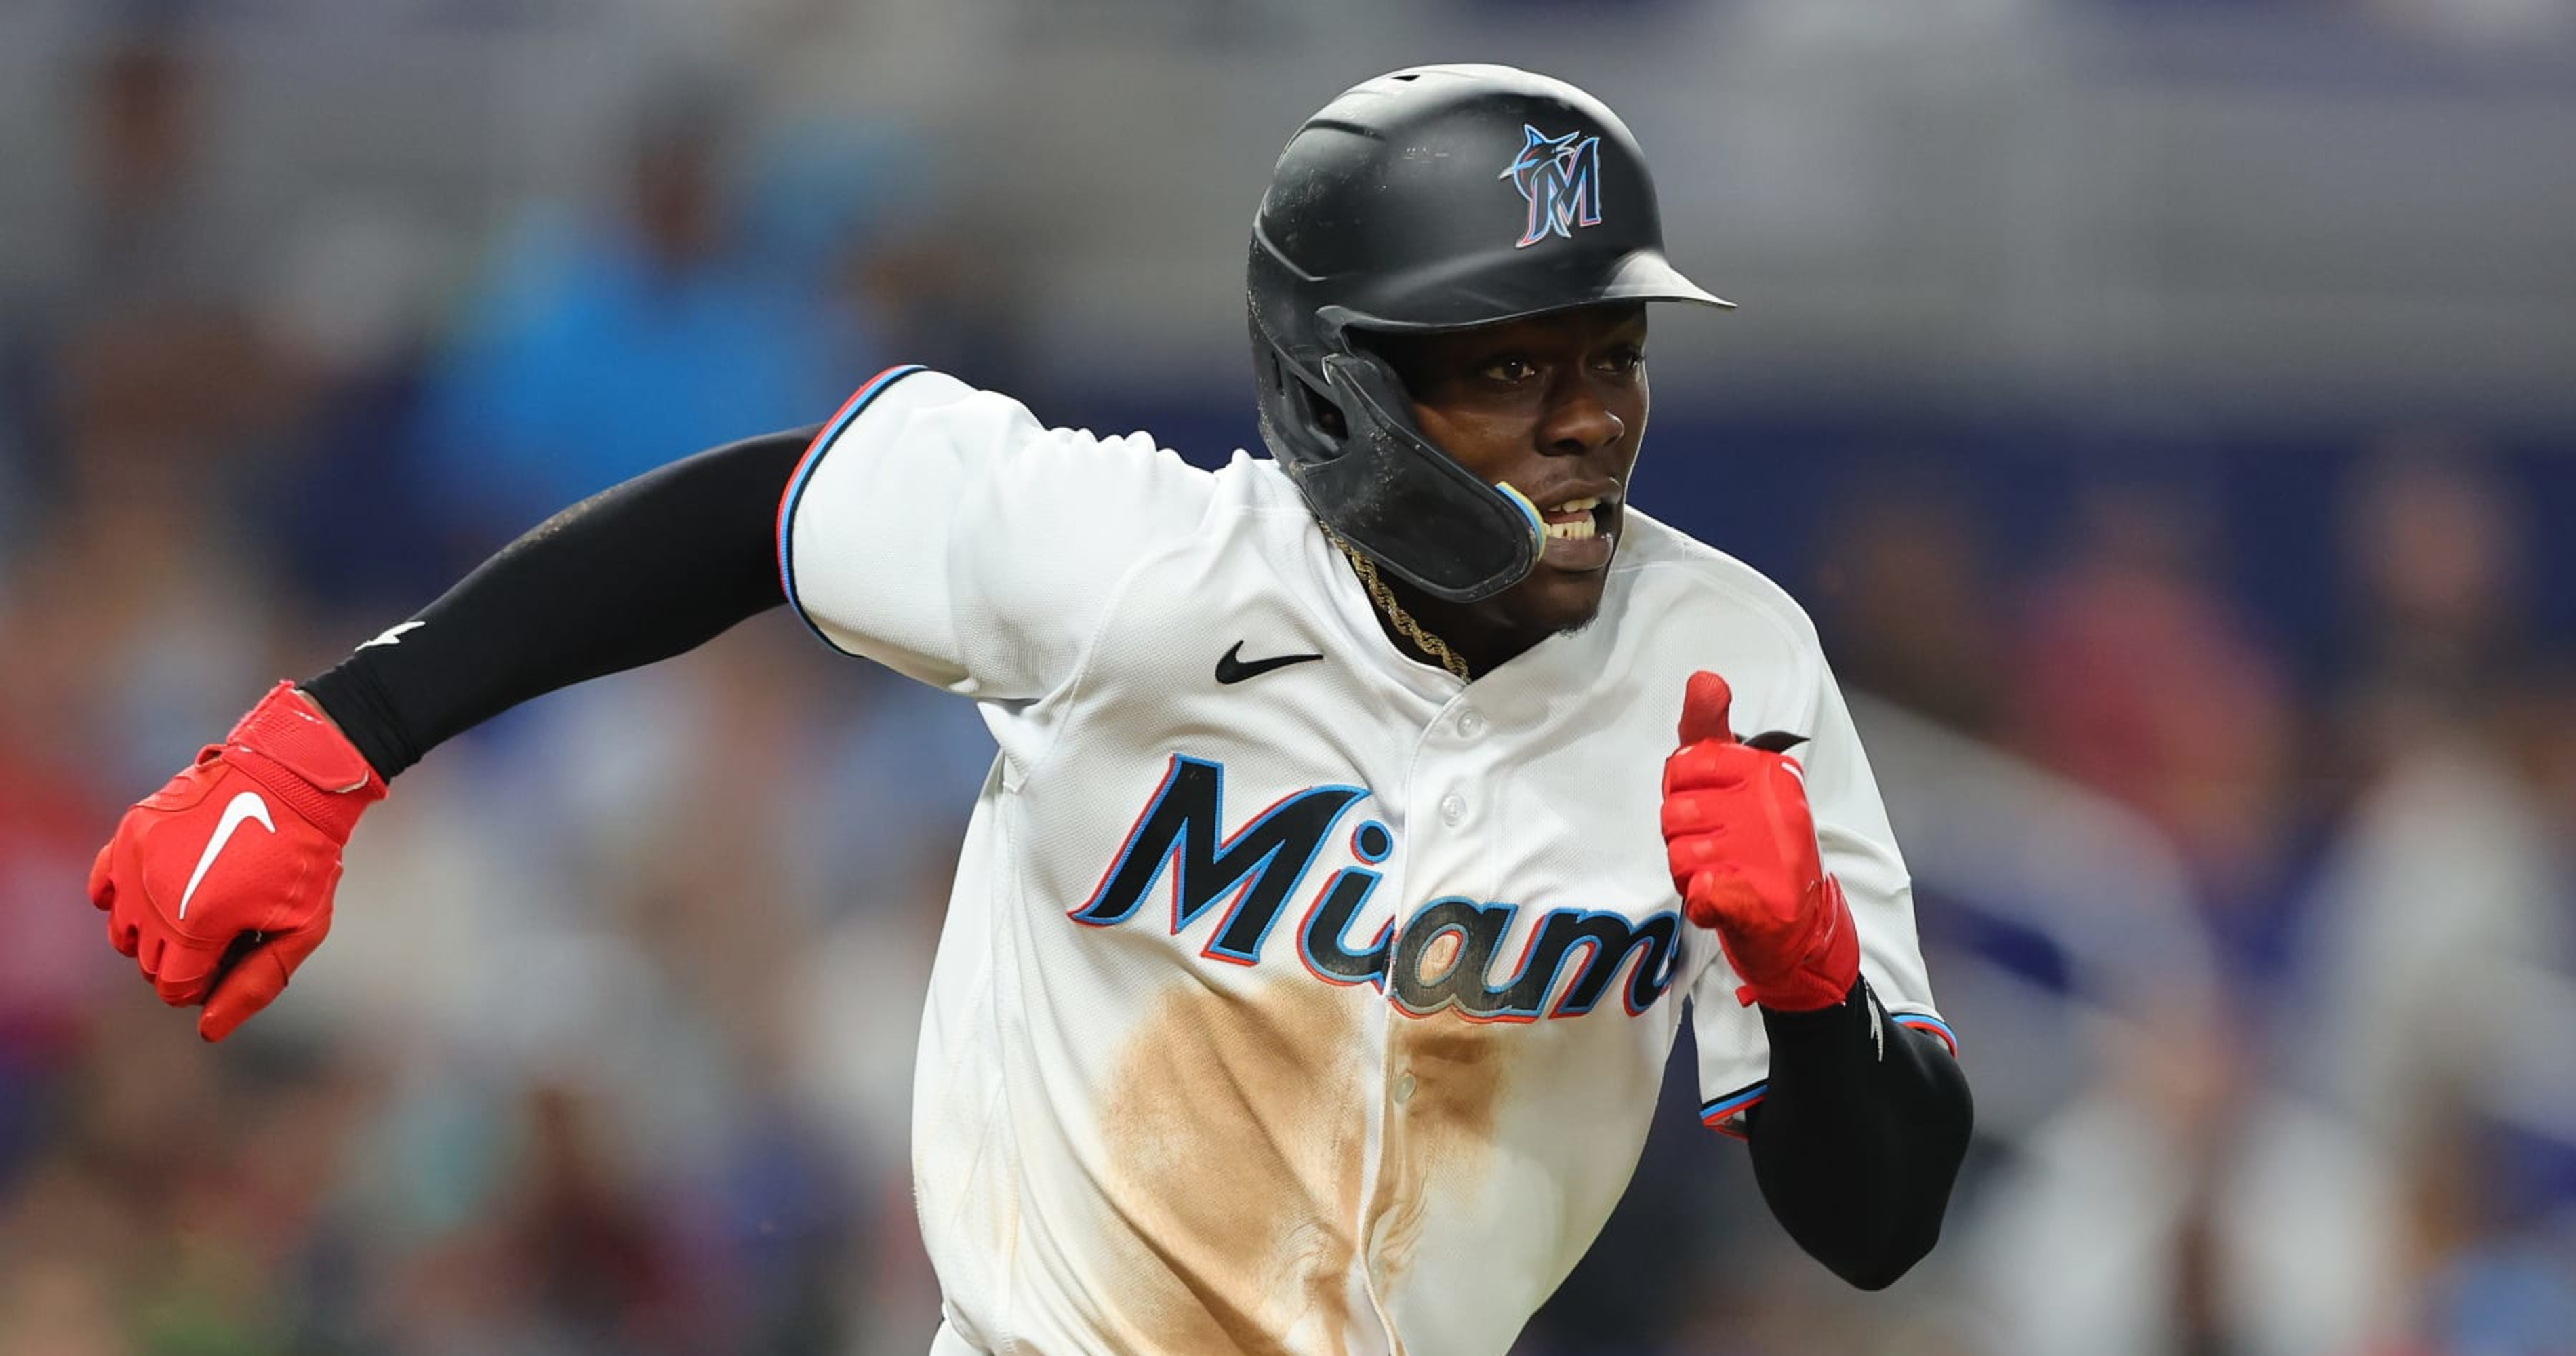 MLB The Show '23 cover athlete is Marlins' Jazz Chisholm